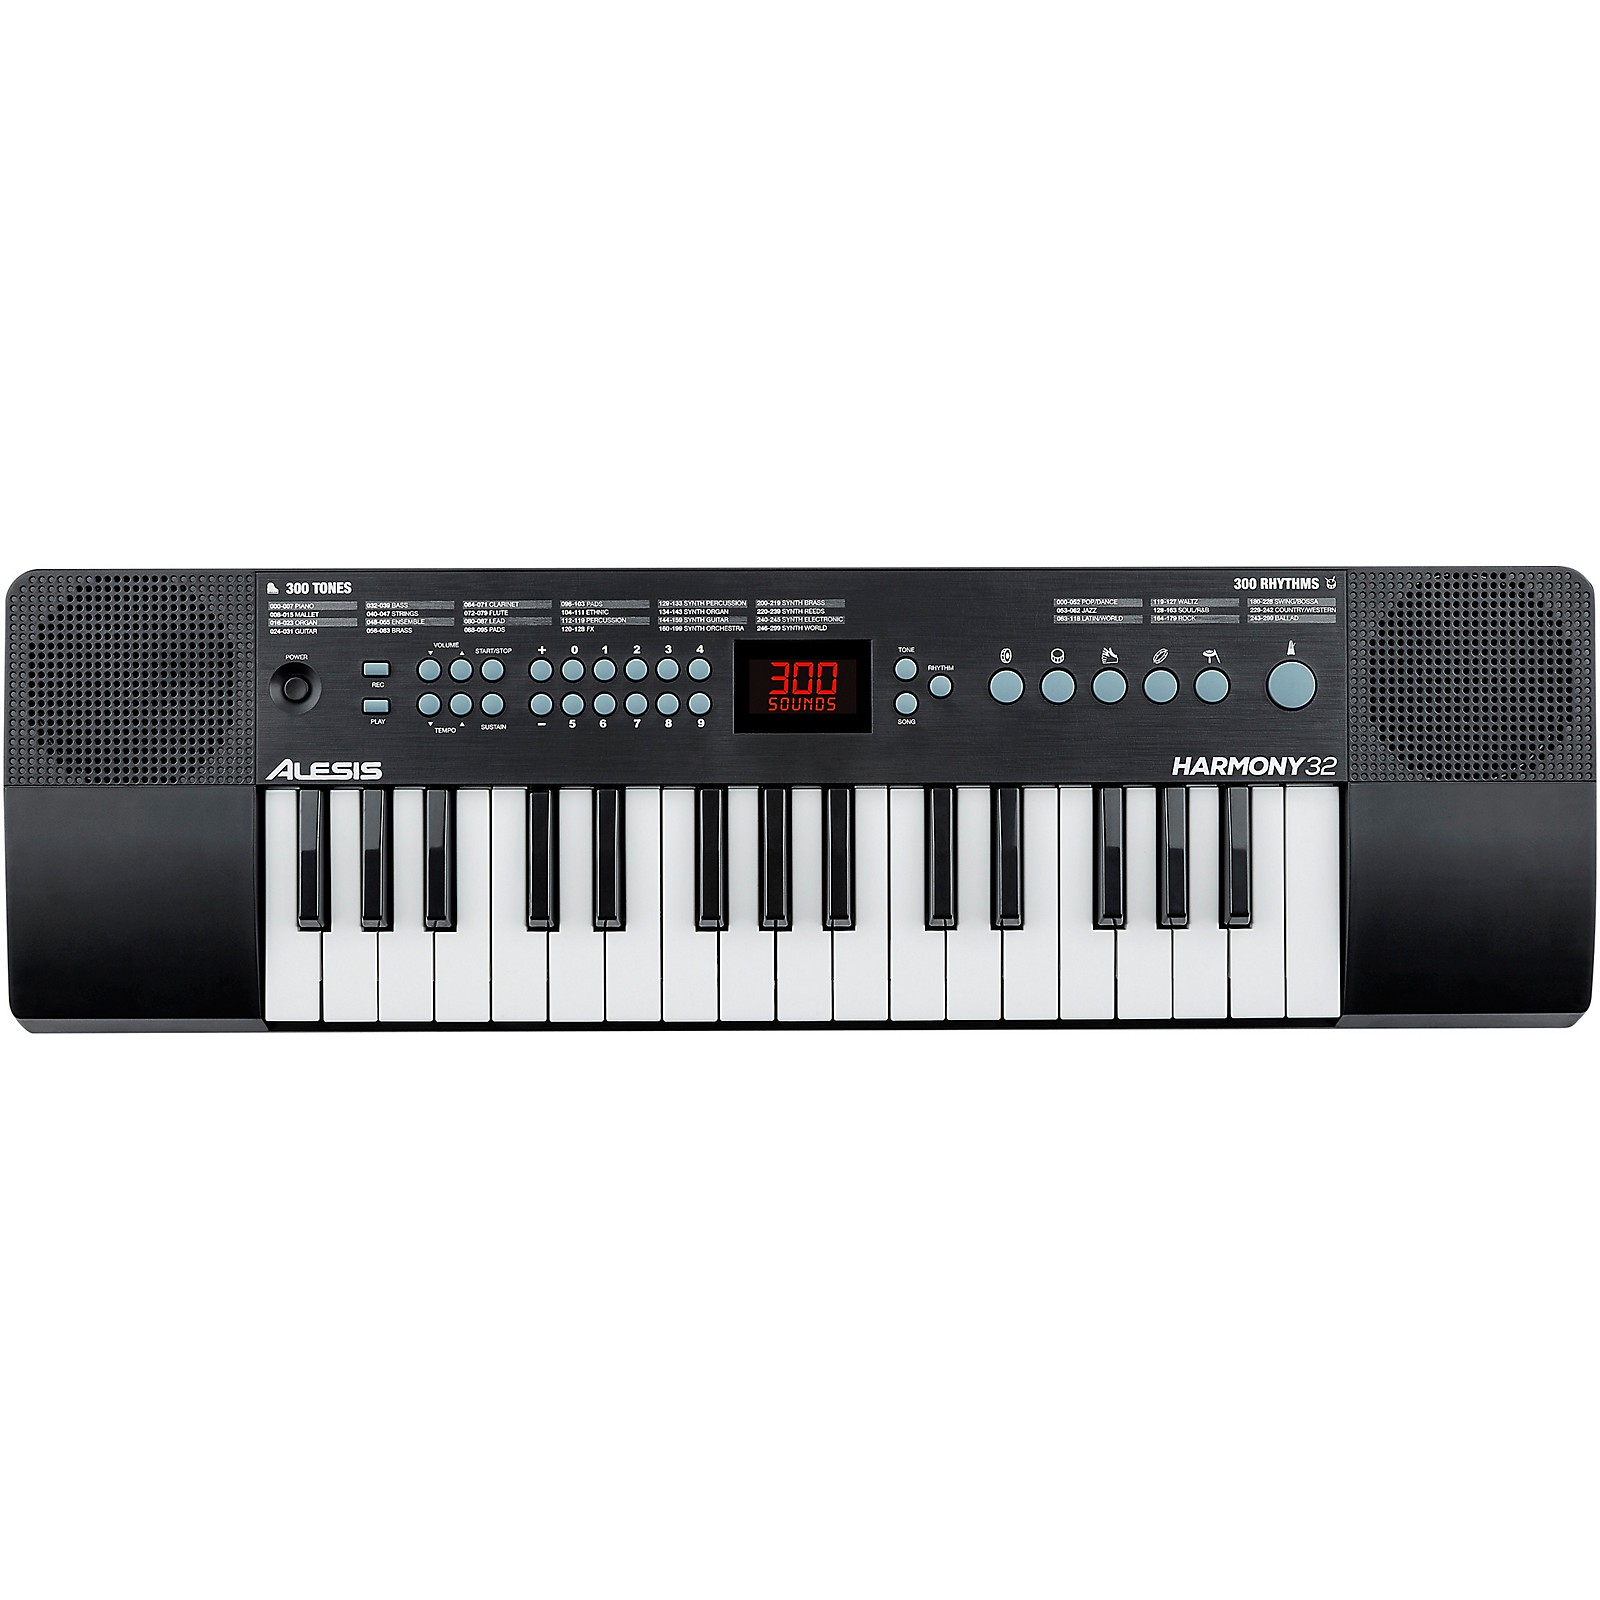 USB-MIDI Connectivity 40 Demo Songs Portable 32 Key Mini Digital Piano / Keyboard with Built-in Speakers Alesis Melody 32 Renewed 300 Built-In Sounds 